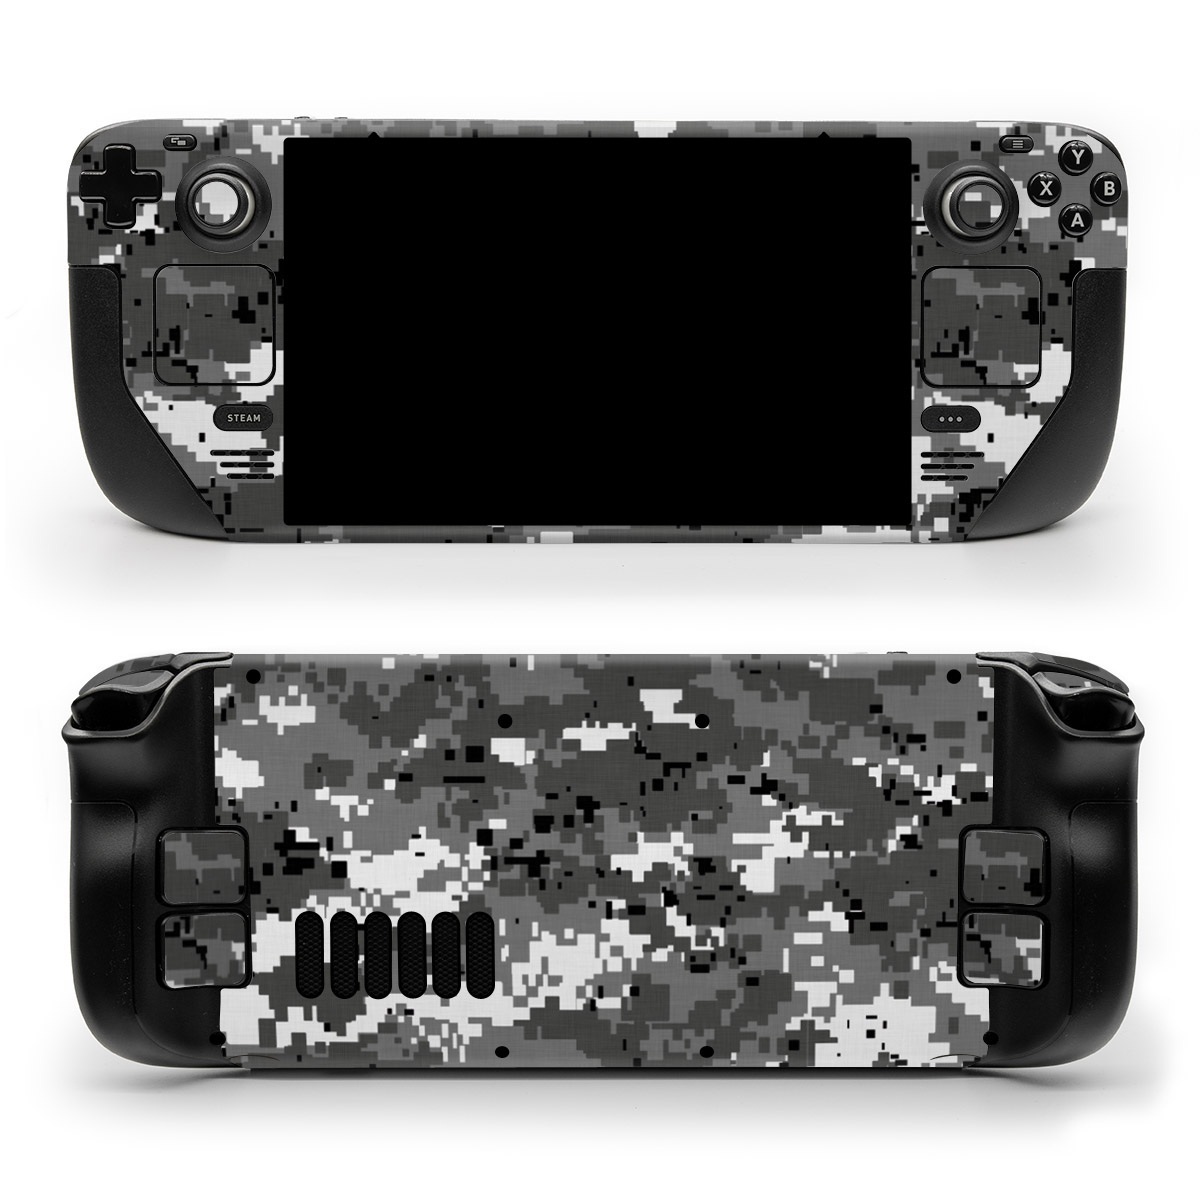 Valve Steam Deck Skin design of Military camouflage, Pattern, Camouflage, Design, Uniform, Metal, Black-and-white, with black, gray colors